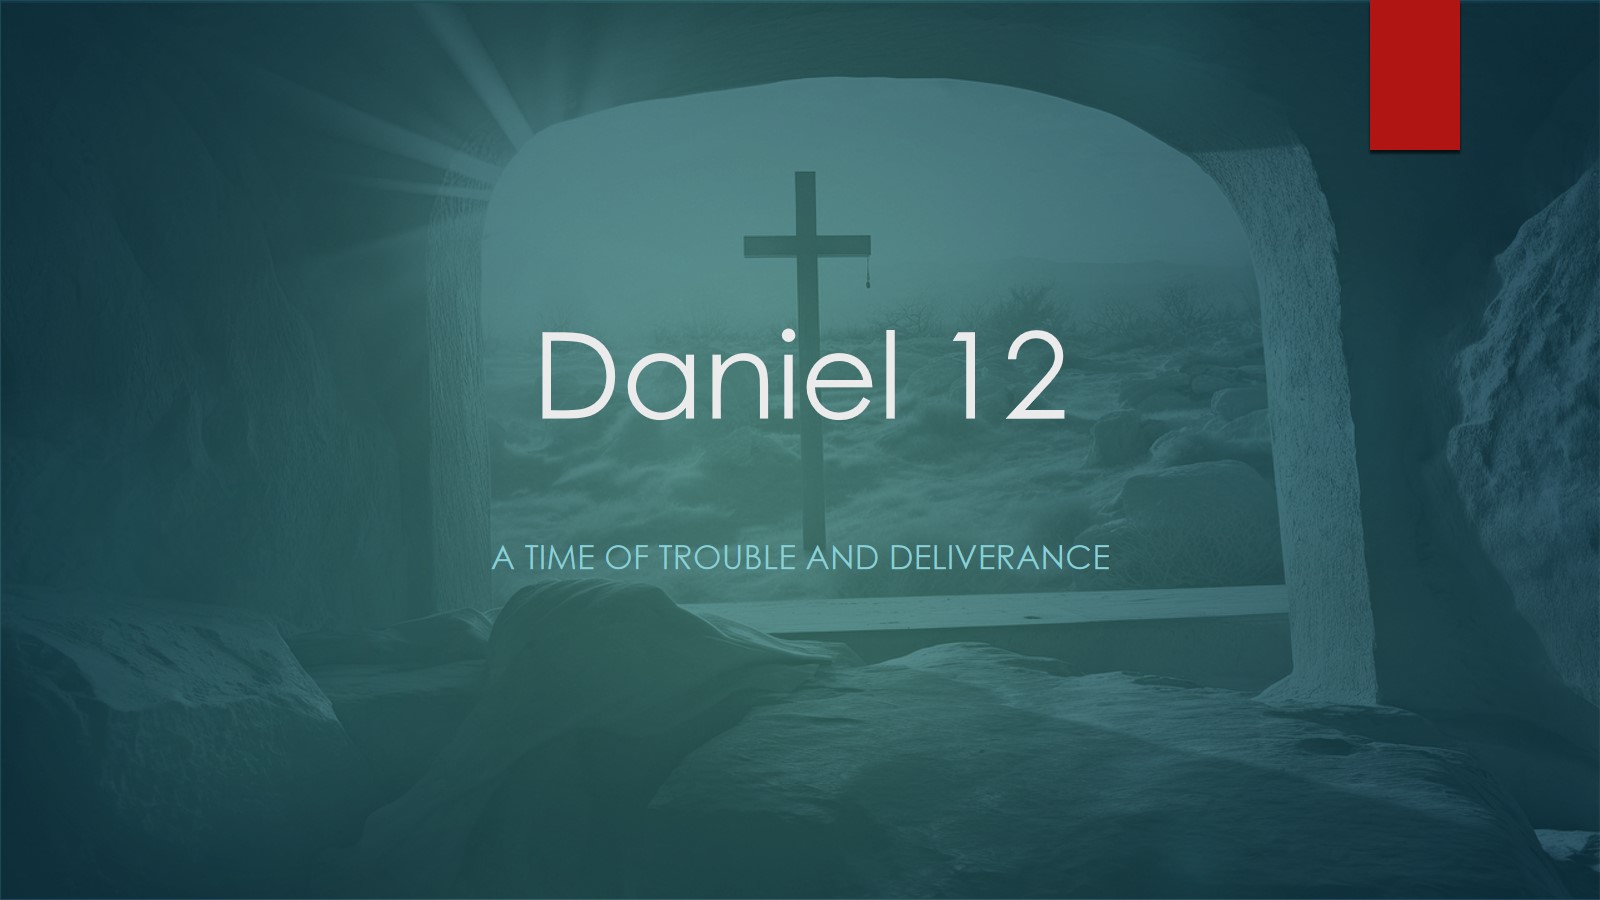 Daniel 12 – A Time of Trouble and Deliverance